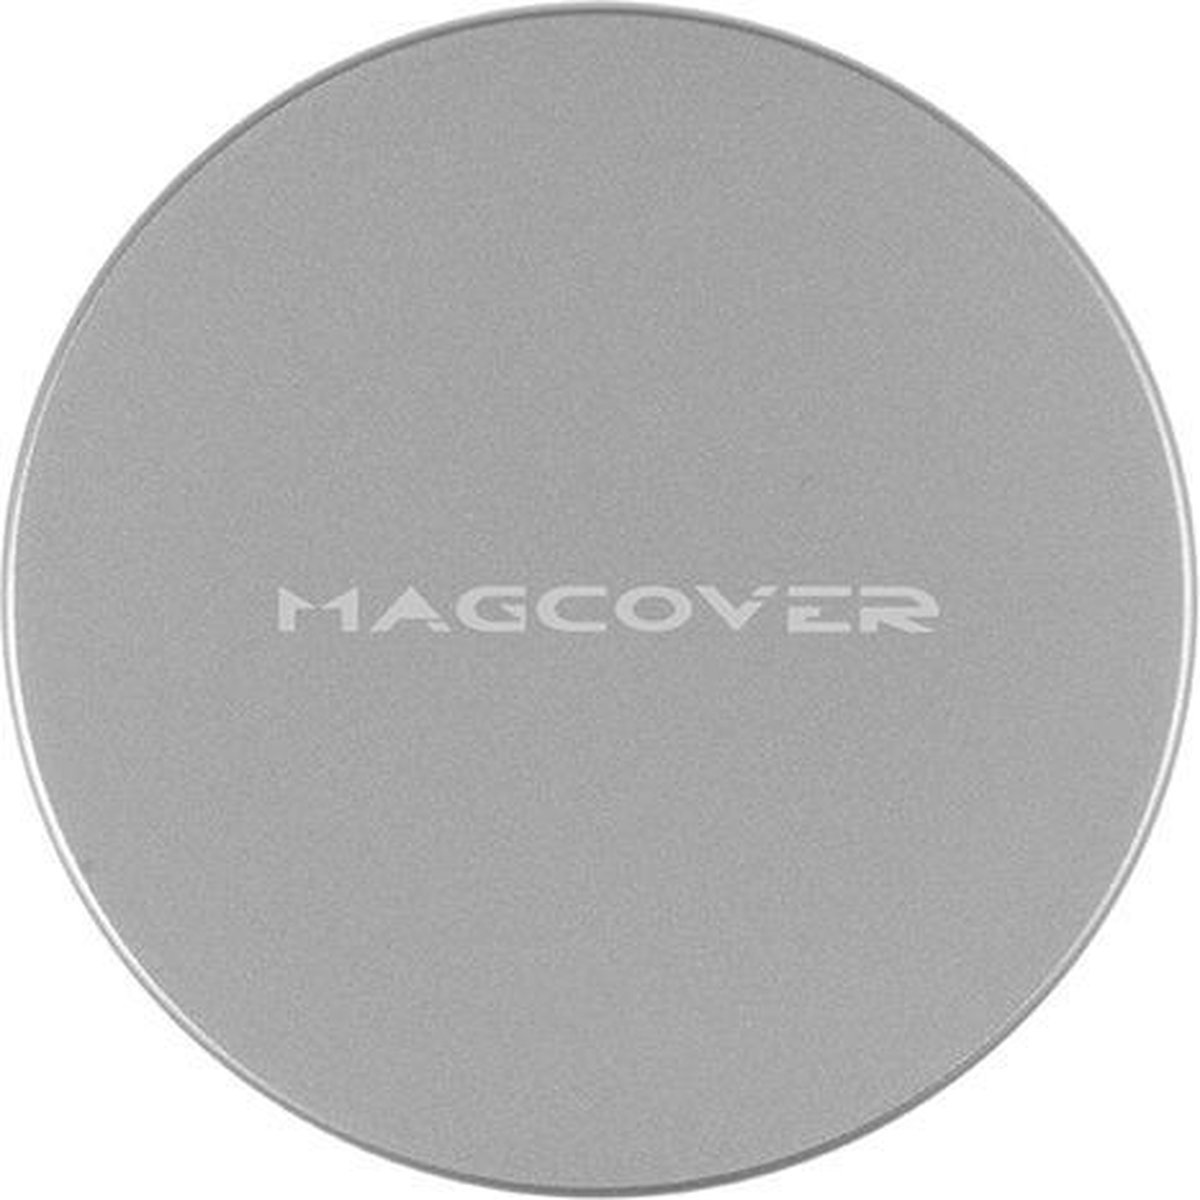 Magcover - Universal Disc for Smart Phones - Fit All Smart Phones - Patented